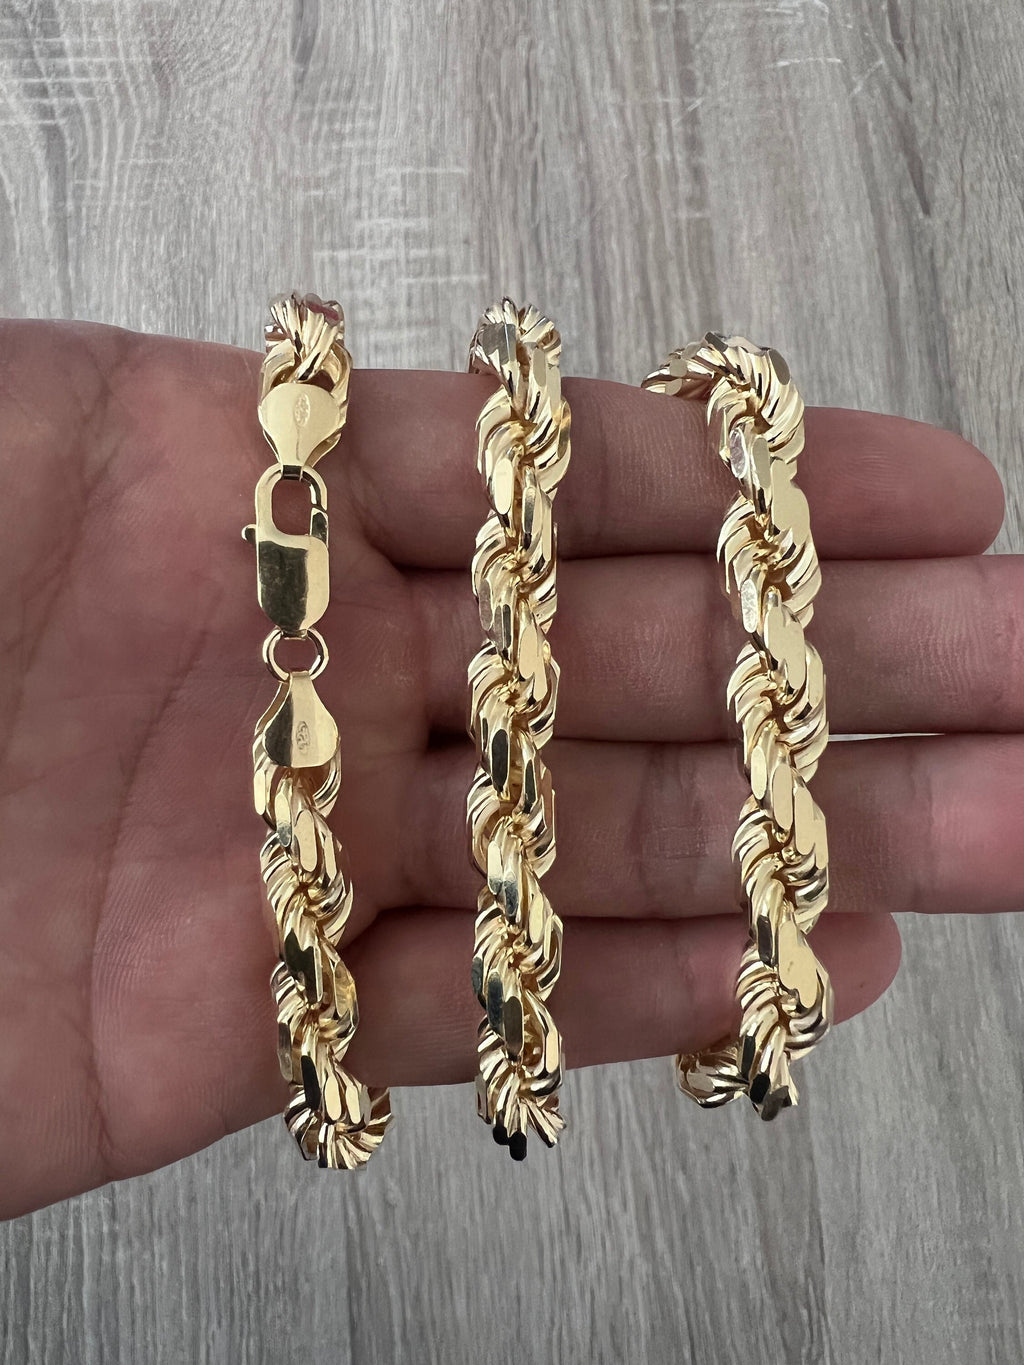 8mm Rope 14K Gold Vermeil Over Solid 925 Sterling Silver Chain